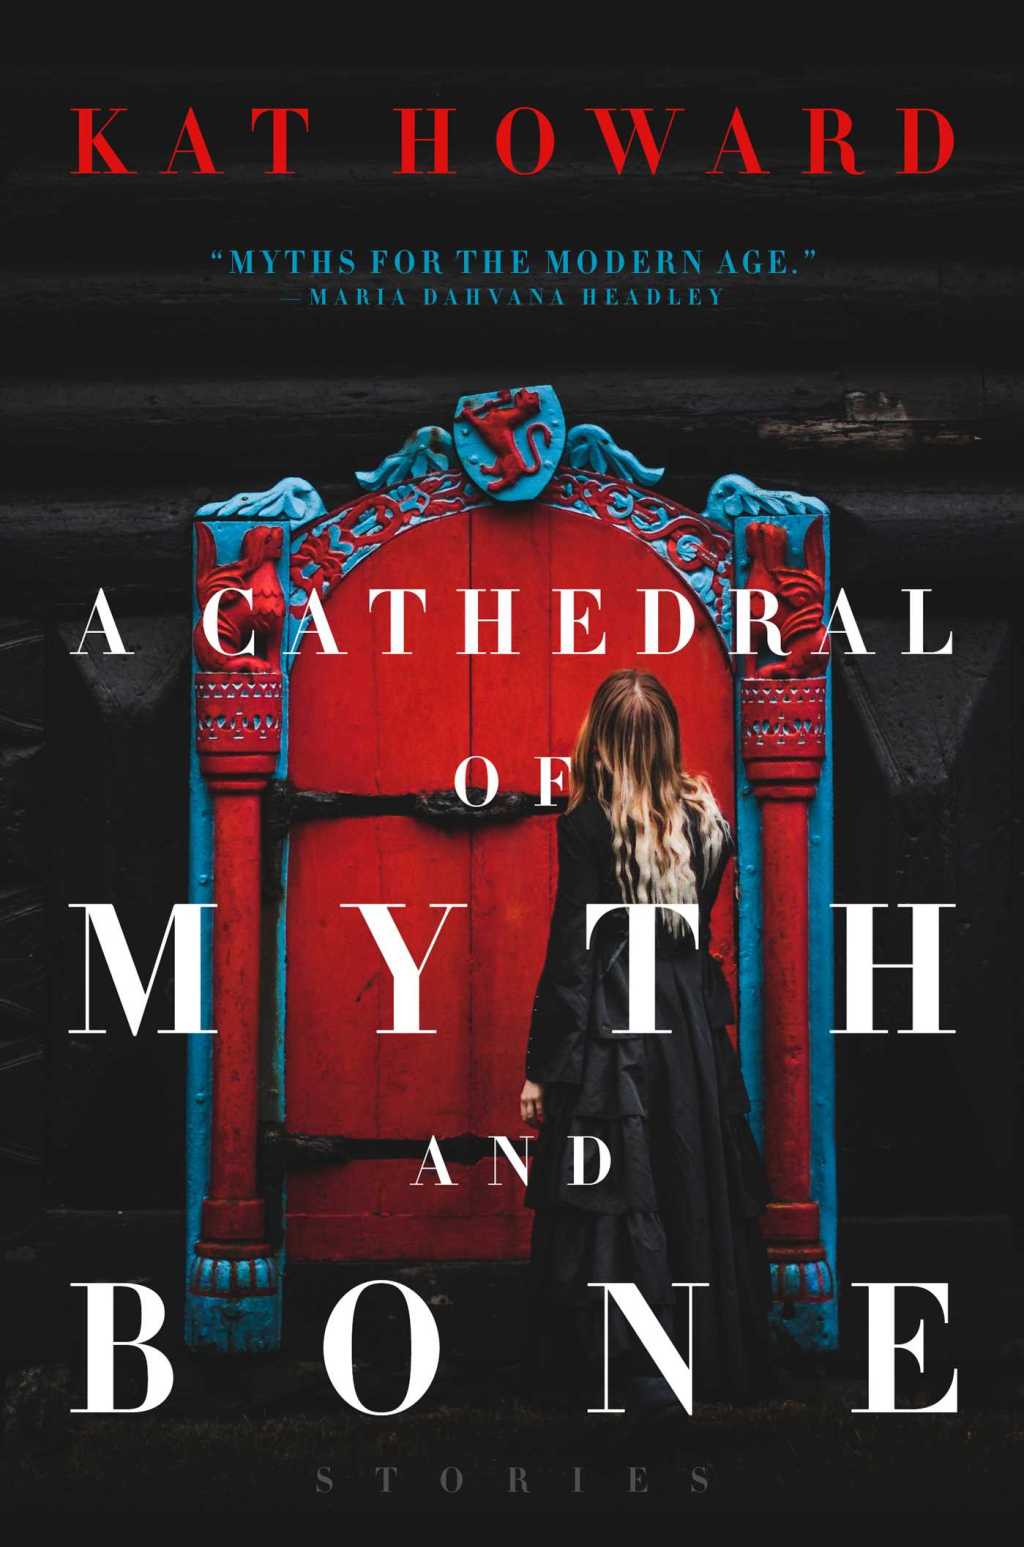 Autumn Books Preview: Cathedral of Myth and Bone